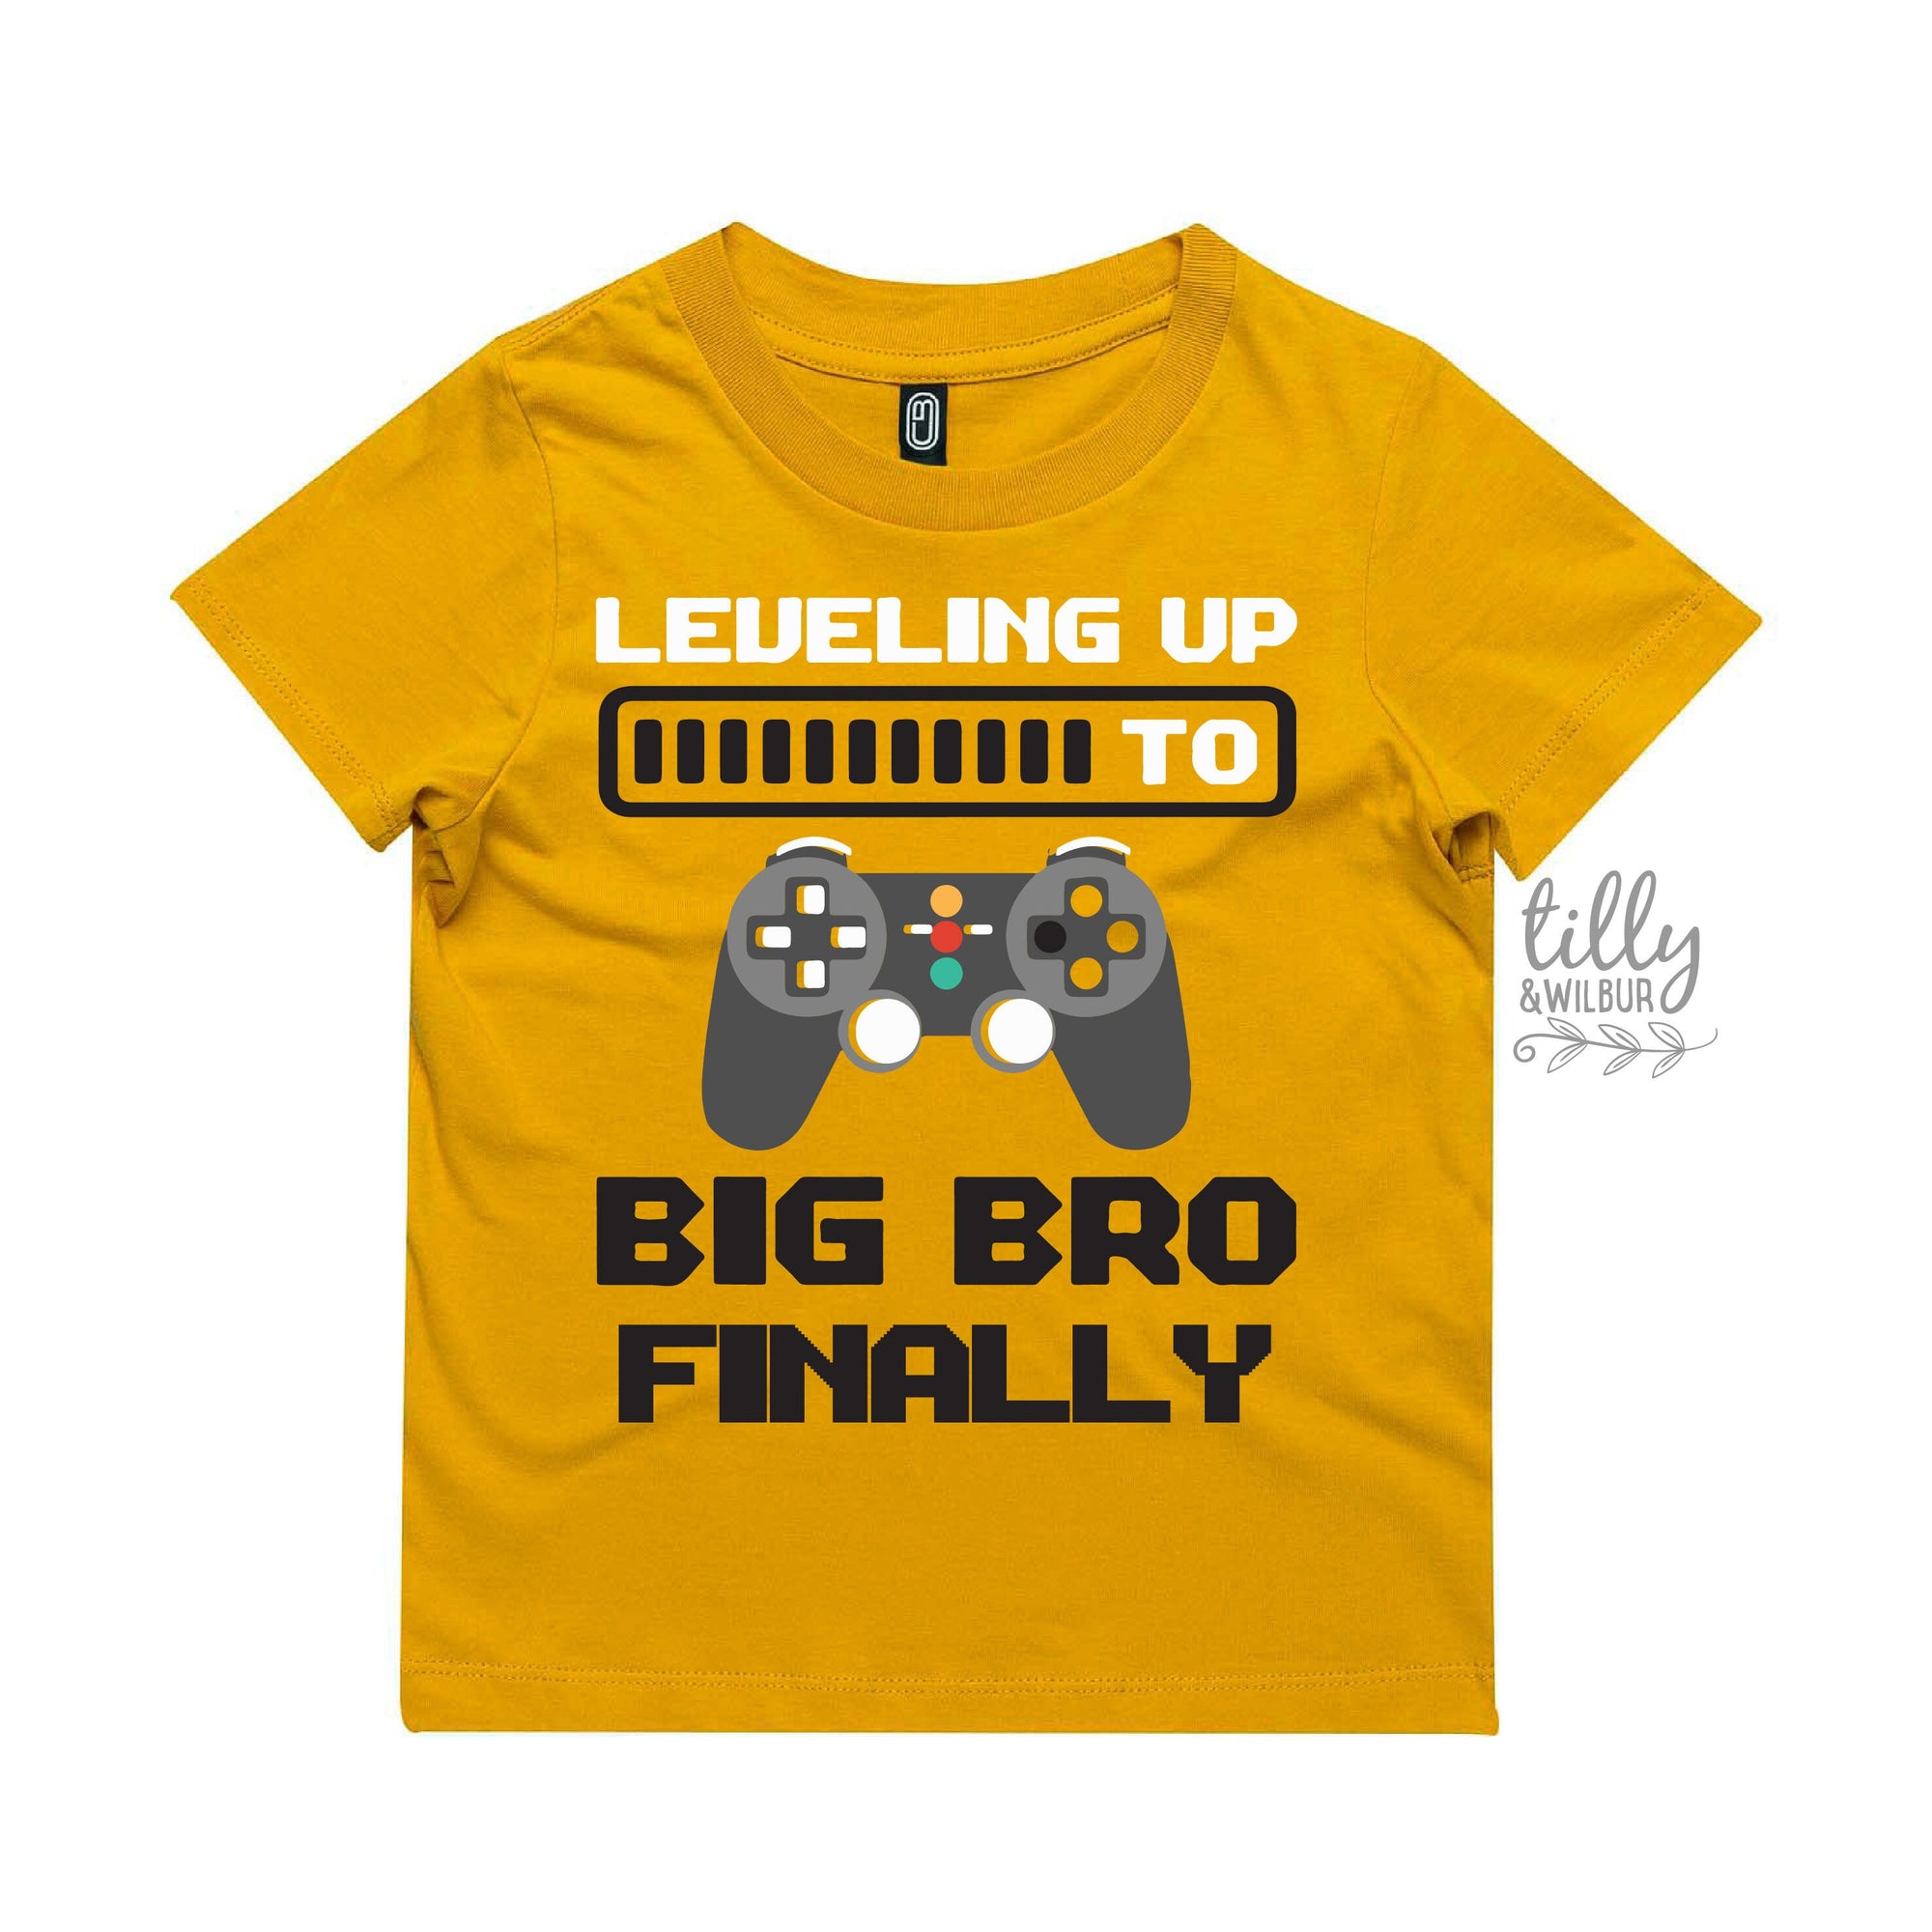 Leveling Up To Big Bro T-Shirt, Big Brother T-Shirt, Promoted To Big Brother Shirt, Pregnancy Announcement, I'm Going To Be A Big Brother